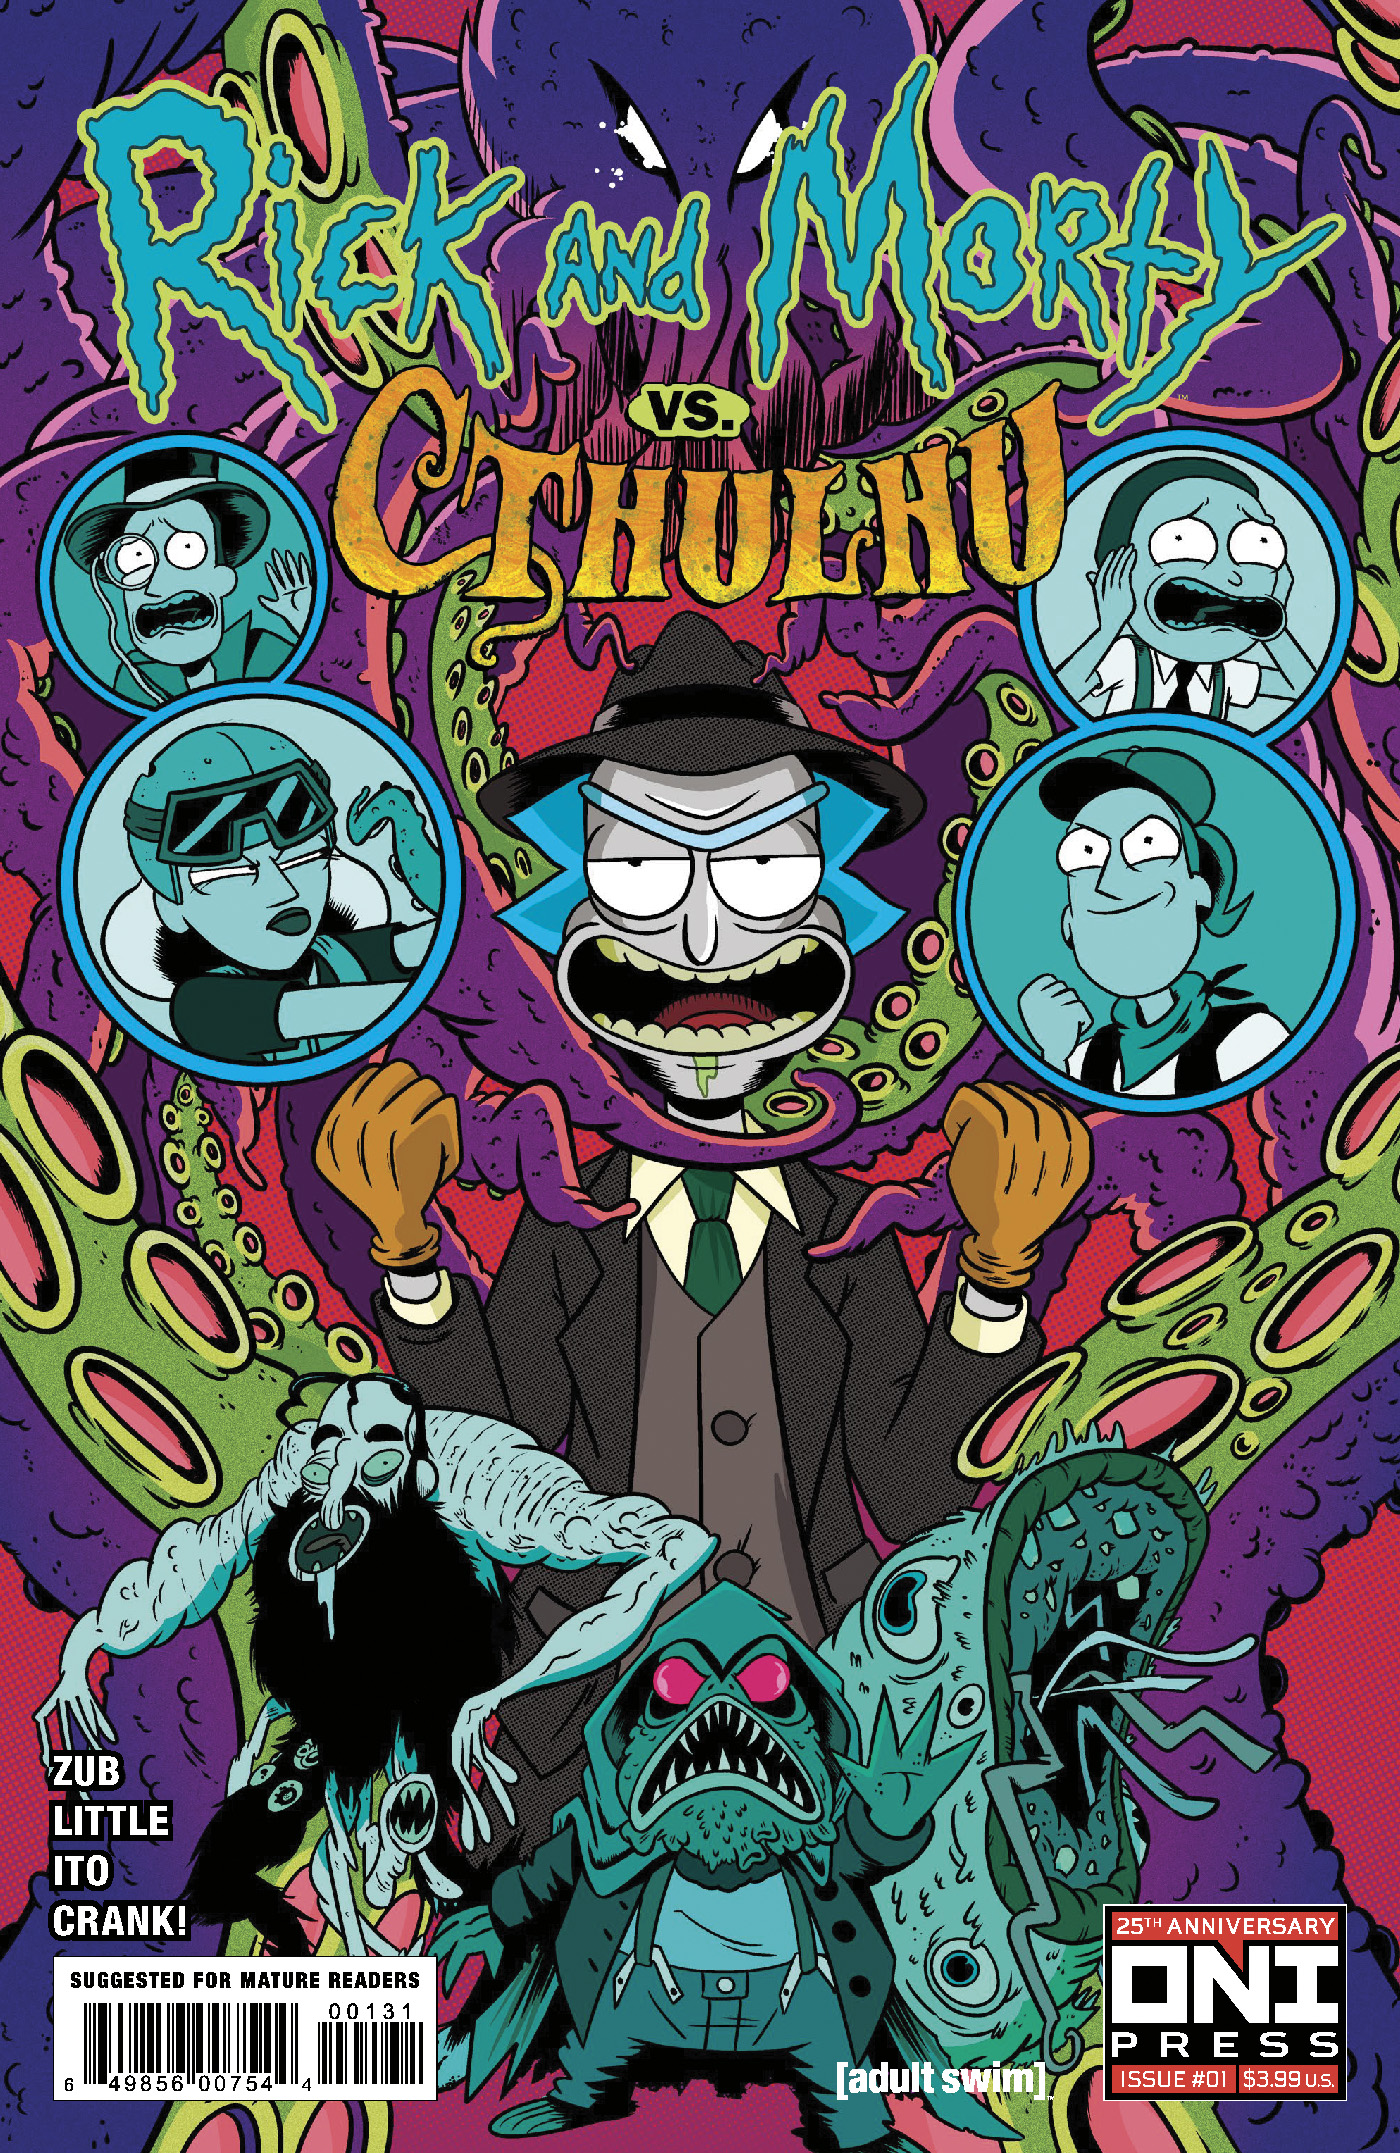 Rick and Morty Vs Cthulhu #1 Cover C Marc Ellerby Variant (Mature) (Of 4)